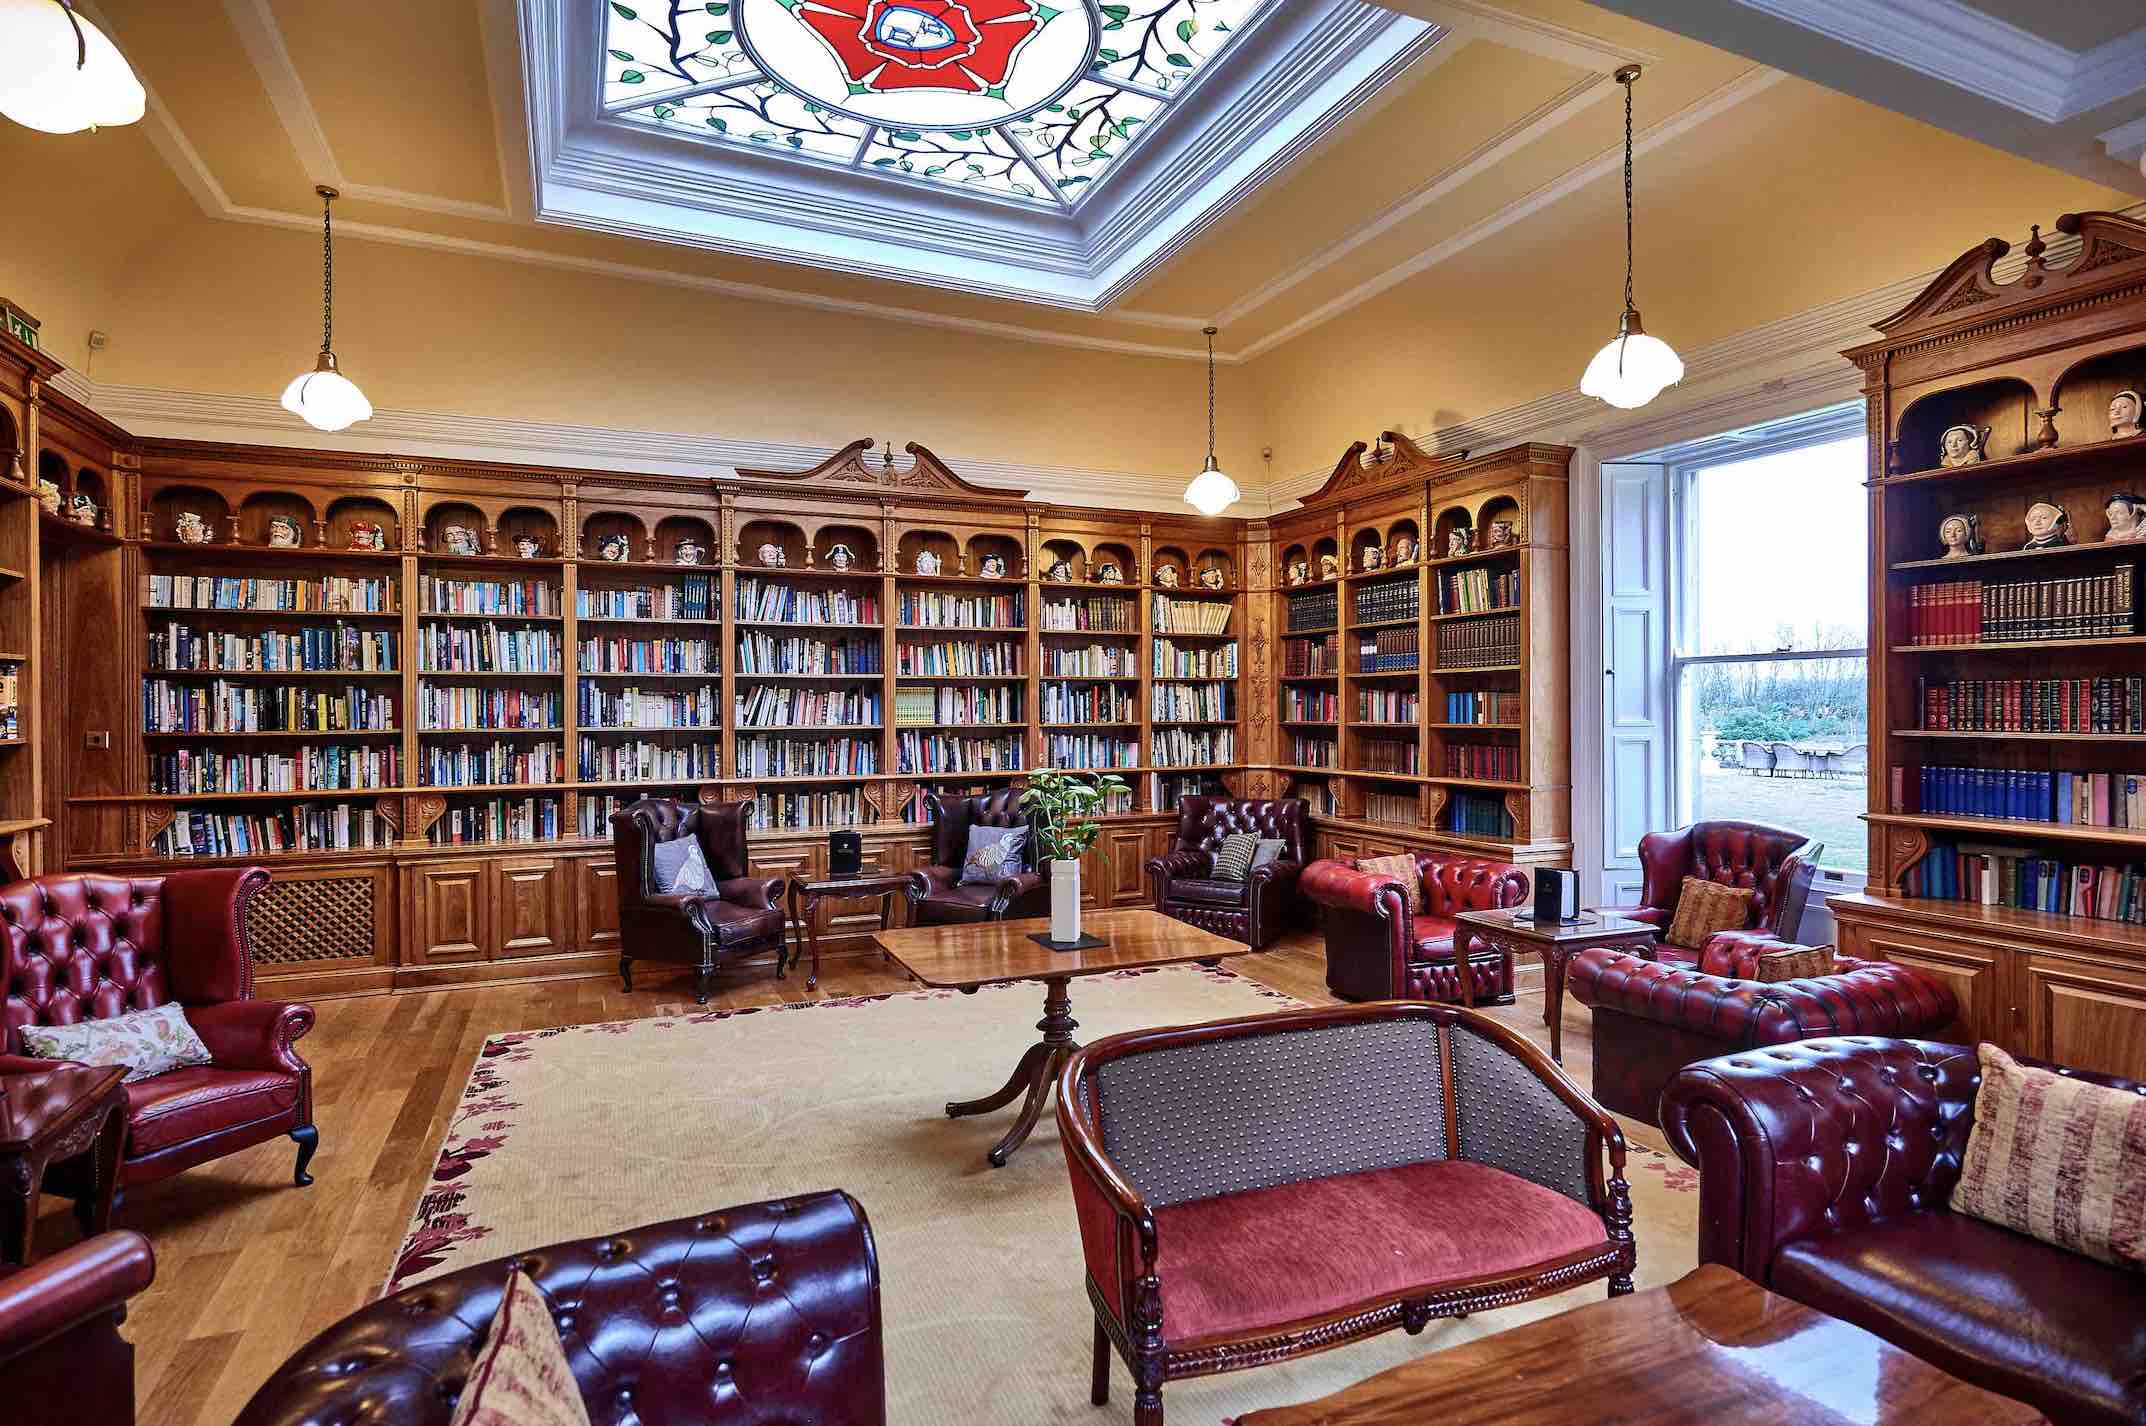 Doxford-Hall sitting room and library